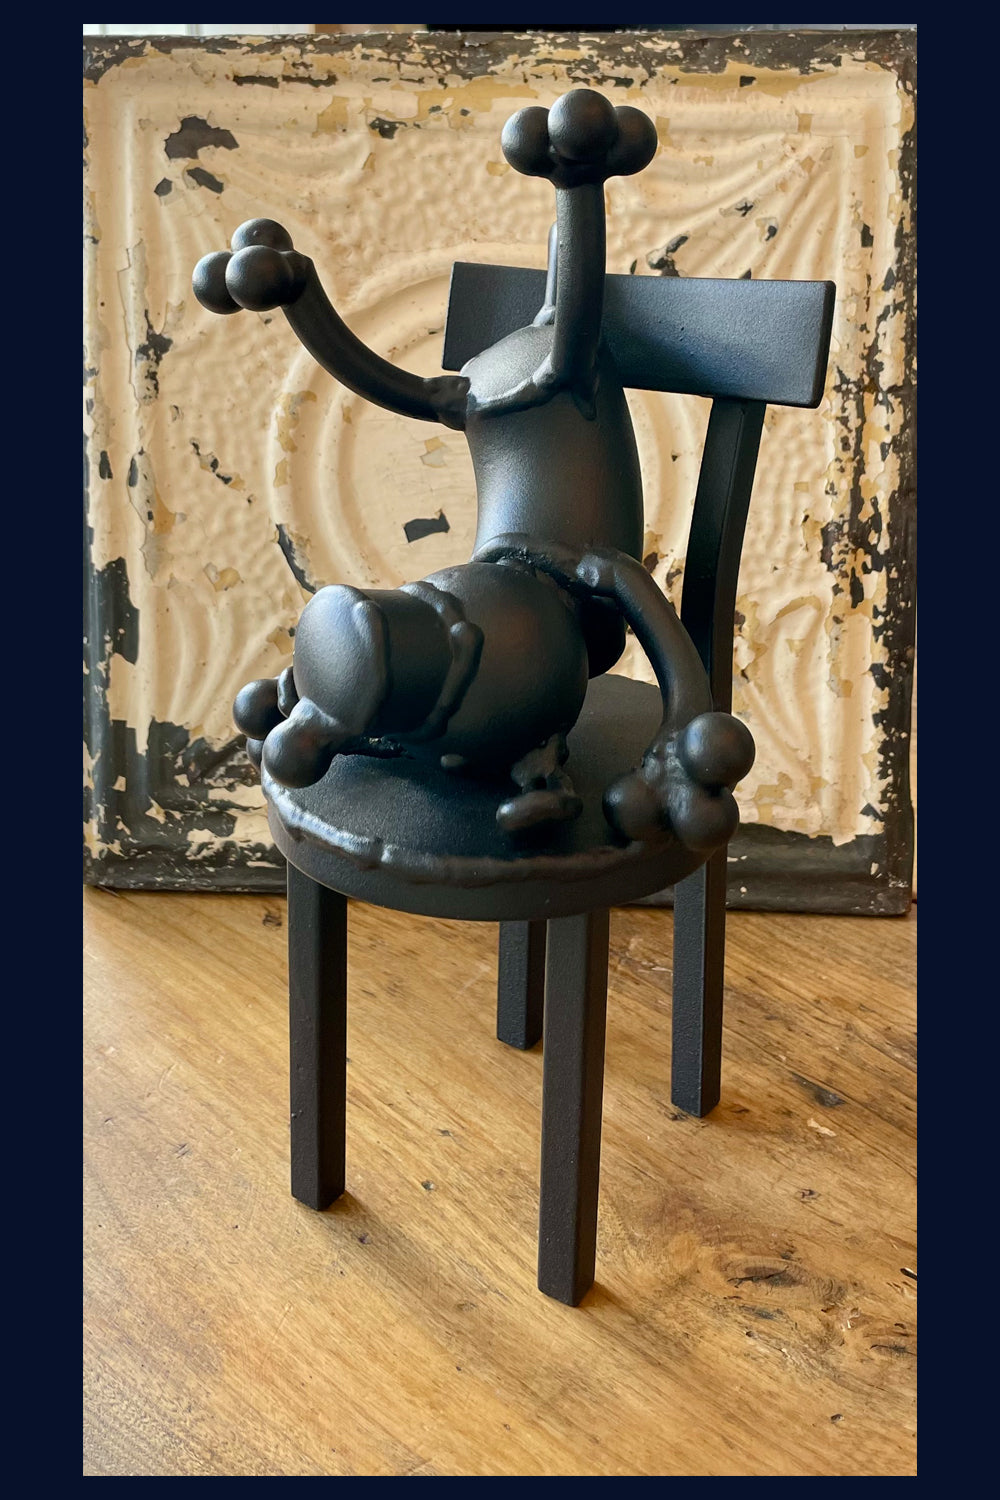 Dog on Chair Contemplating Sculpture by Mick Kirkby-Geddes